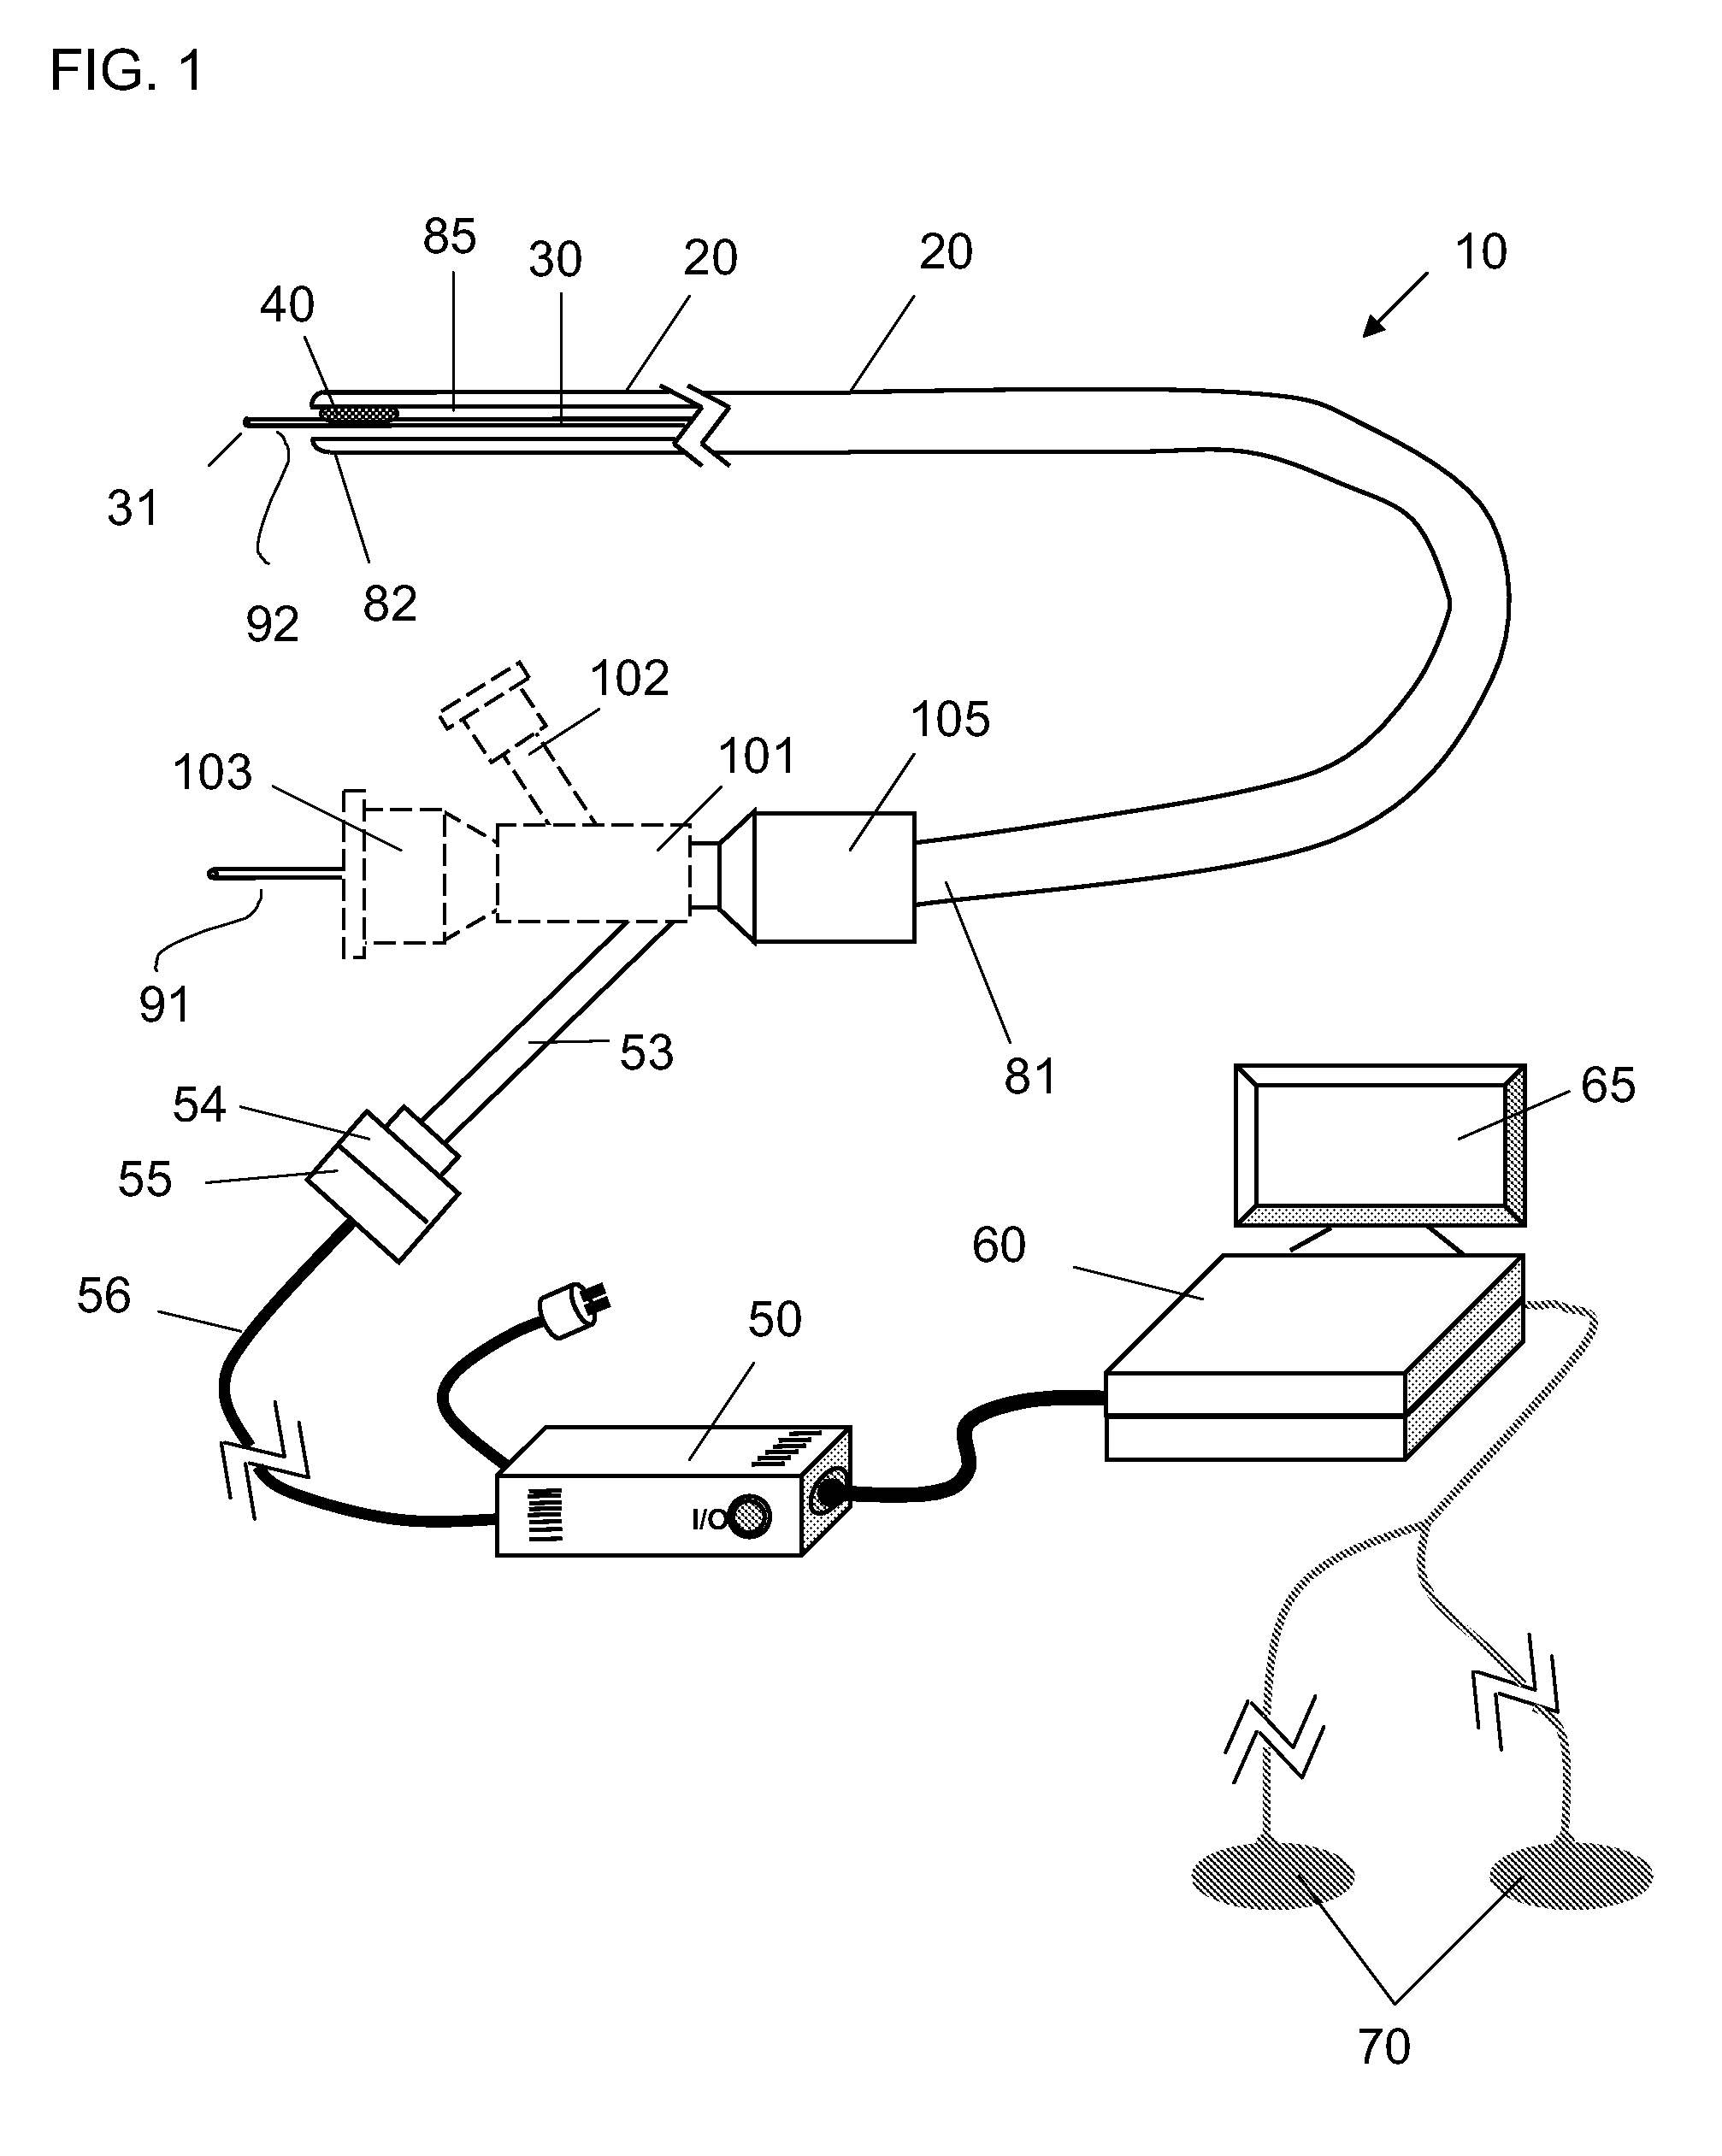 Apparatus and Method for Guided Chronic Total Occlusion Penetration